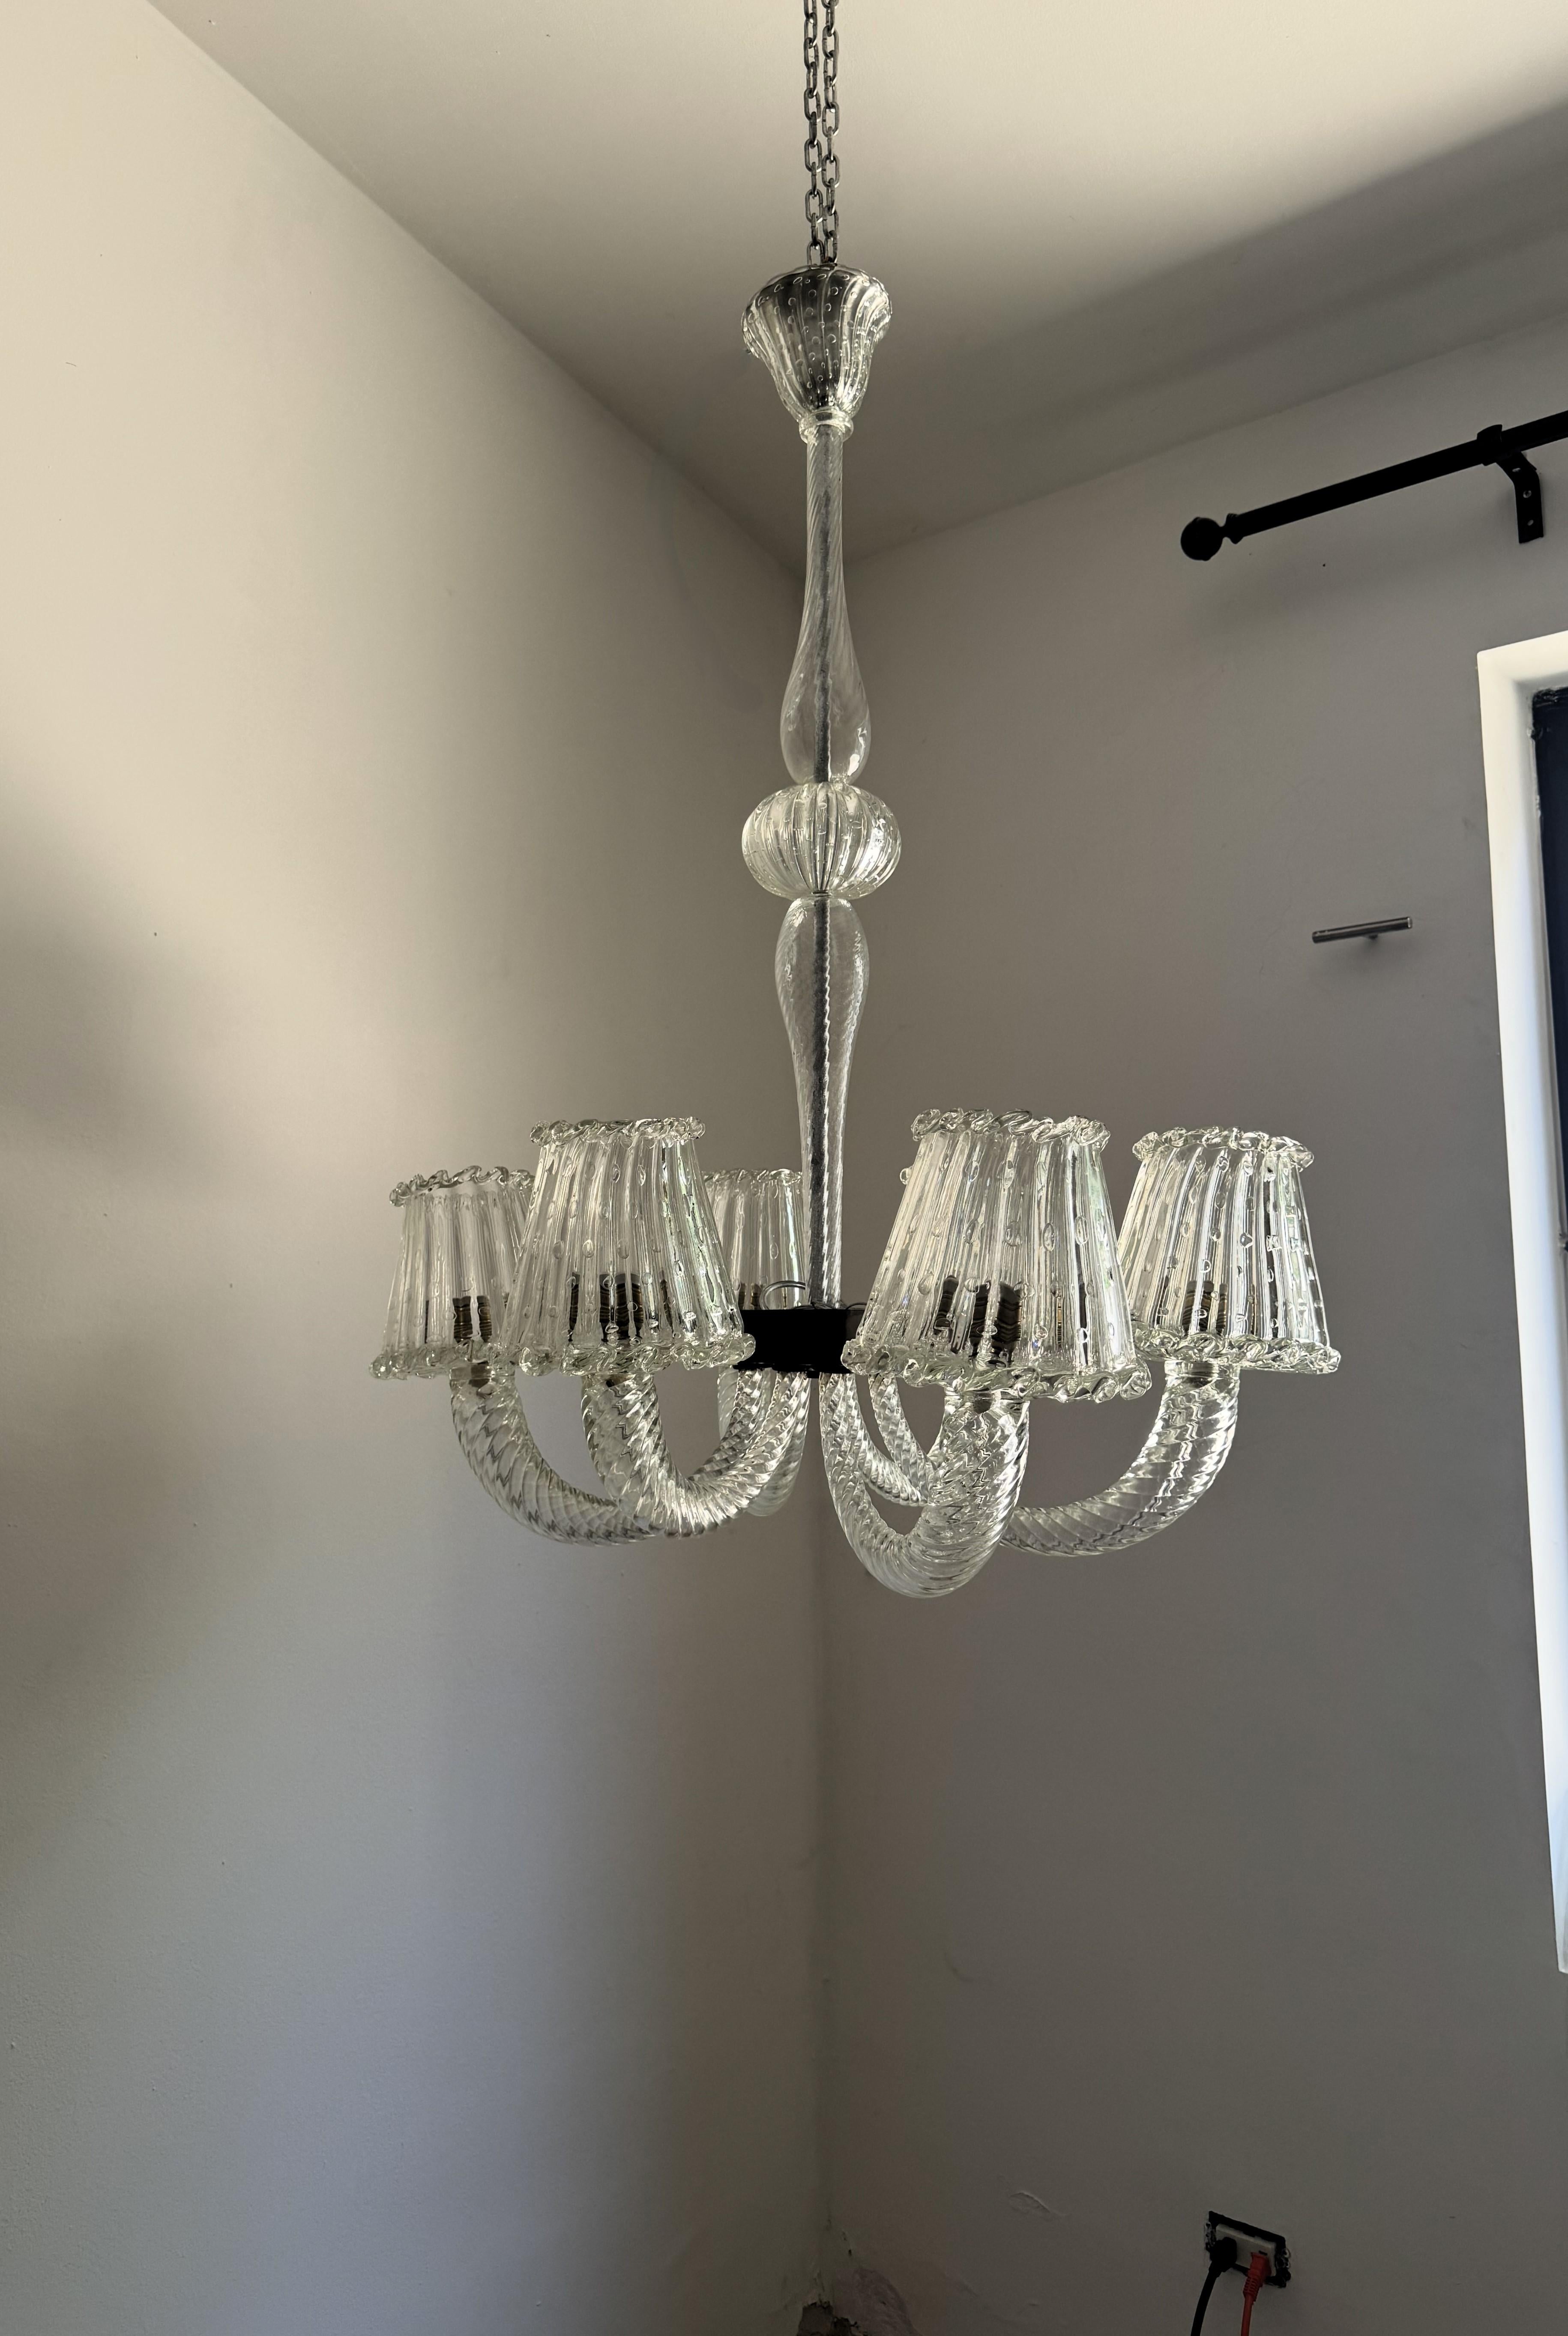 Art Deco Six Light Chandelier Attr. Barovier & Toso, Murano, Italy ca. 1930 For Sale 3